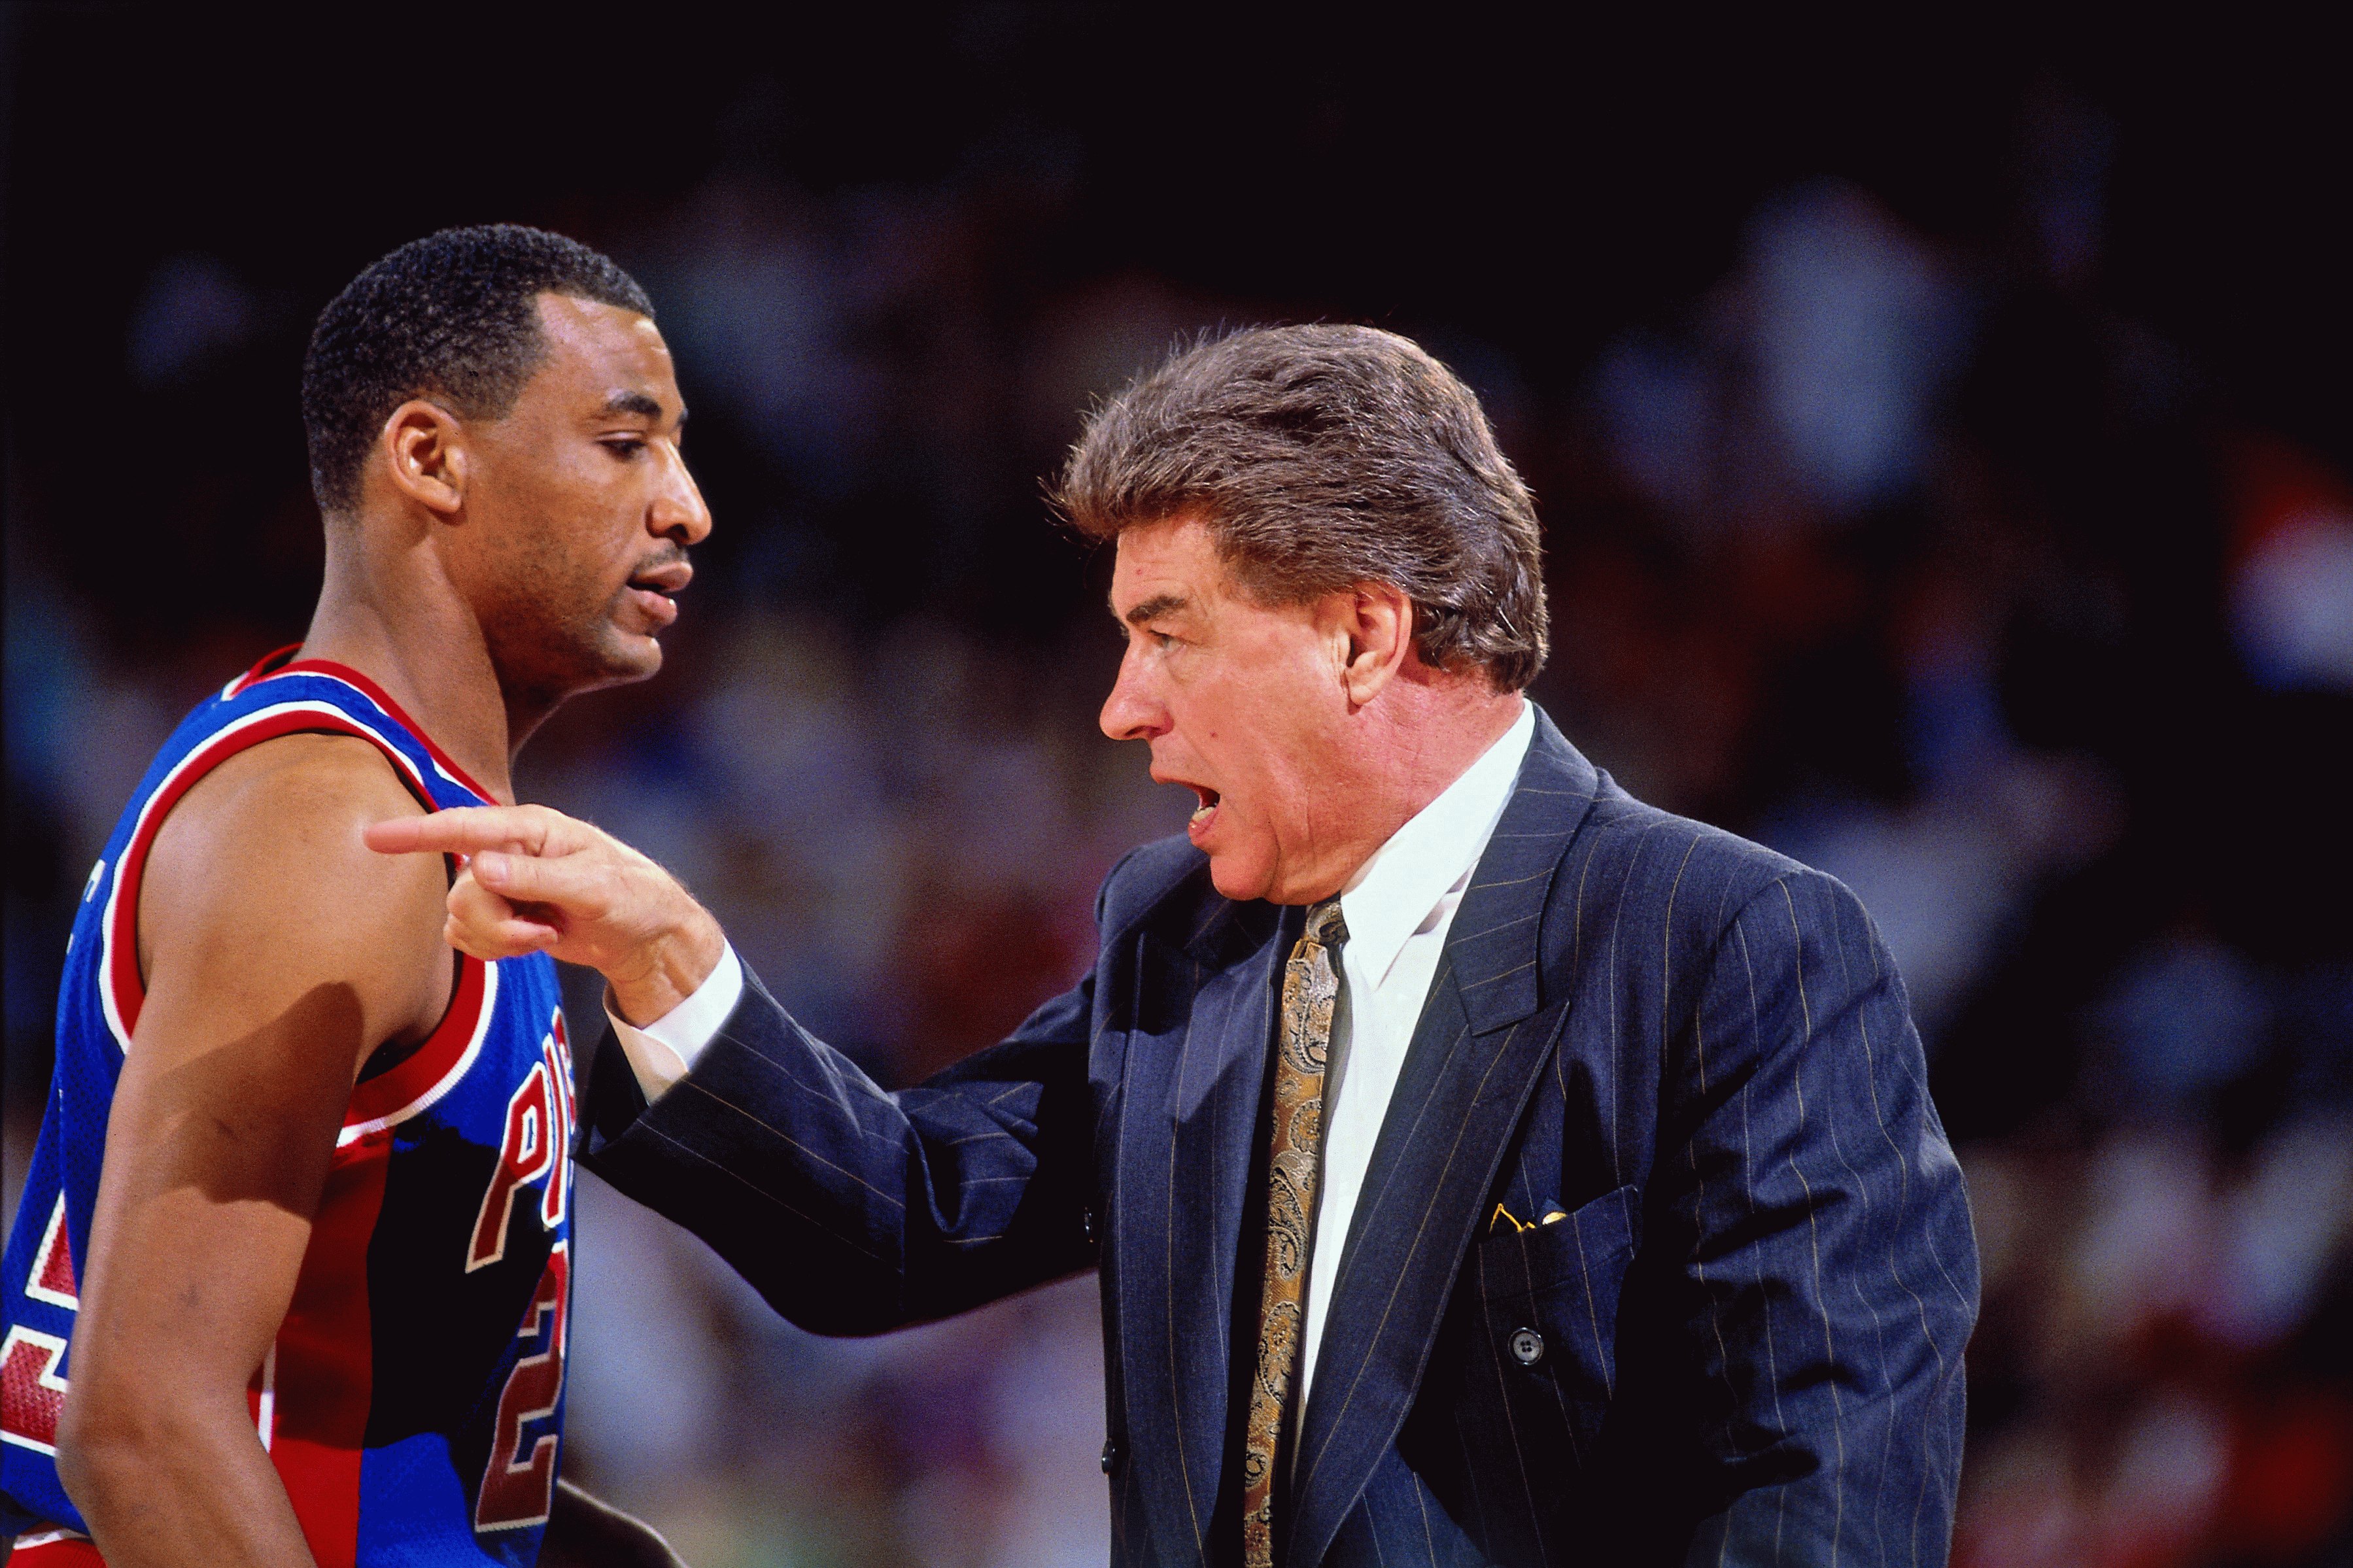 AUBURN HILLS, MI - 1989: Head coach Chuck Daly of the Detroit Pistons points during a game played in 1989 at the Palace of Auburn Hills in Auburn Hills, Michigan. NOTE TO USER: User expressly acknowledges and agrees that, by downloading and/or using this Photograph, user is consenting to the terms and conditions of the Getty Images License Agreement. Mandatory Copyright Notice: Copyright 1989 NBAE (Photo by Nathaniel S. Butler/NBAE via Getty Images)